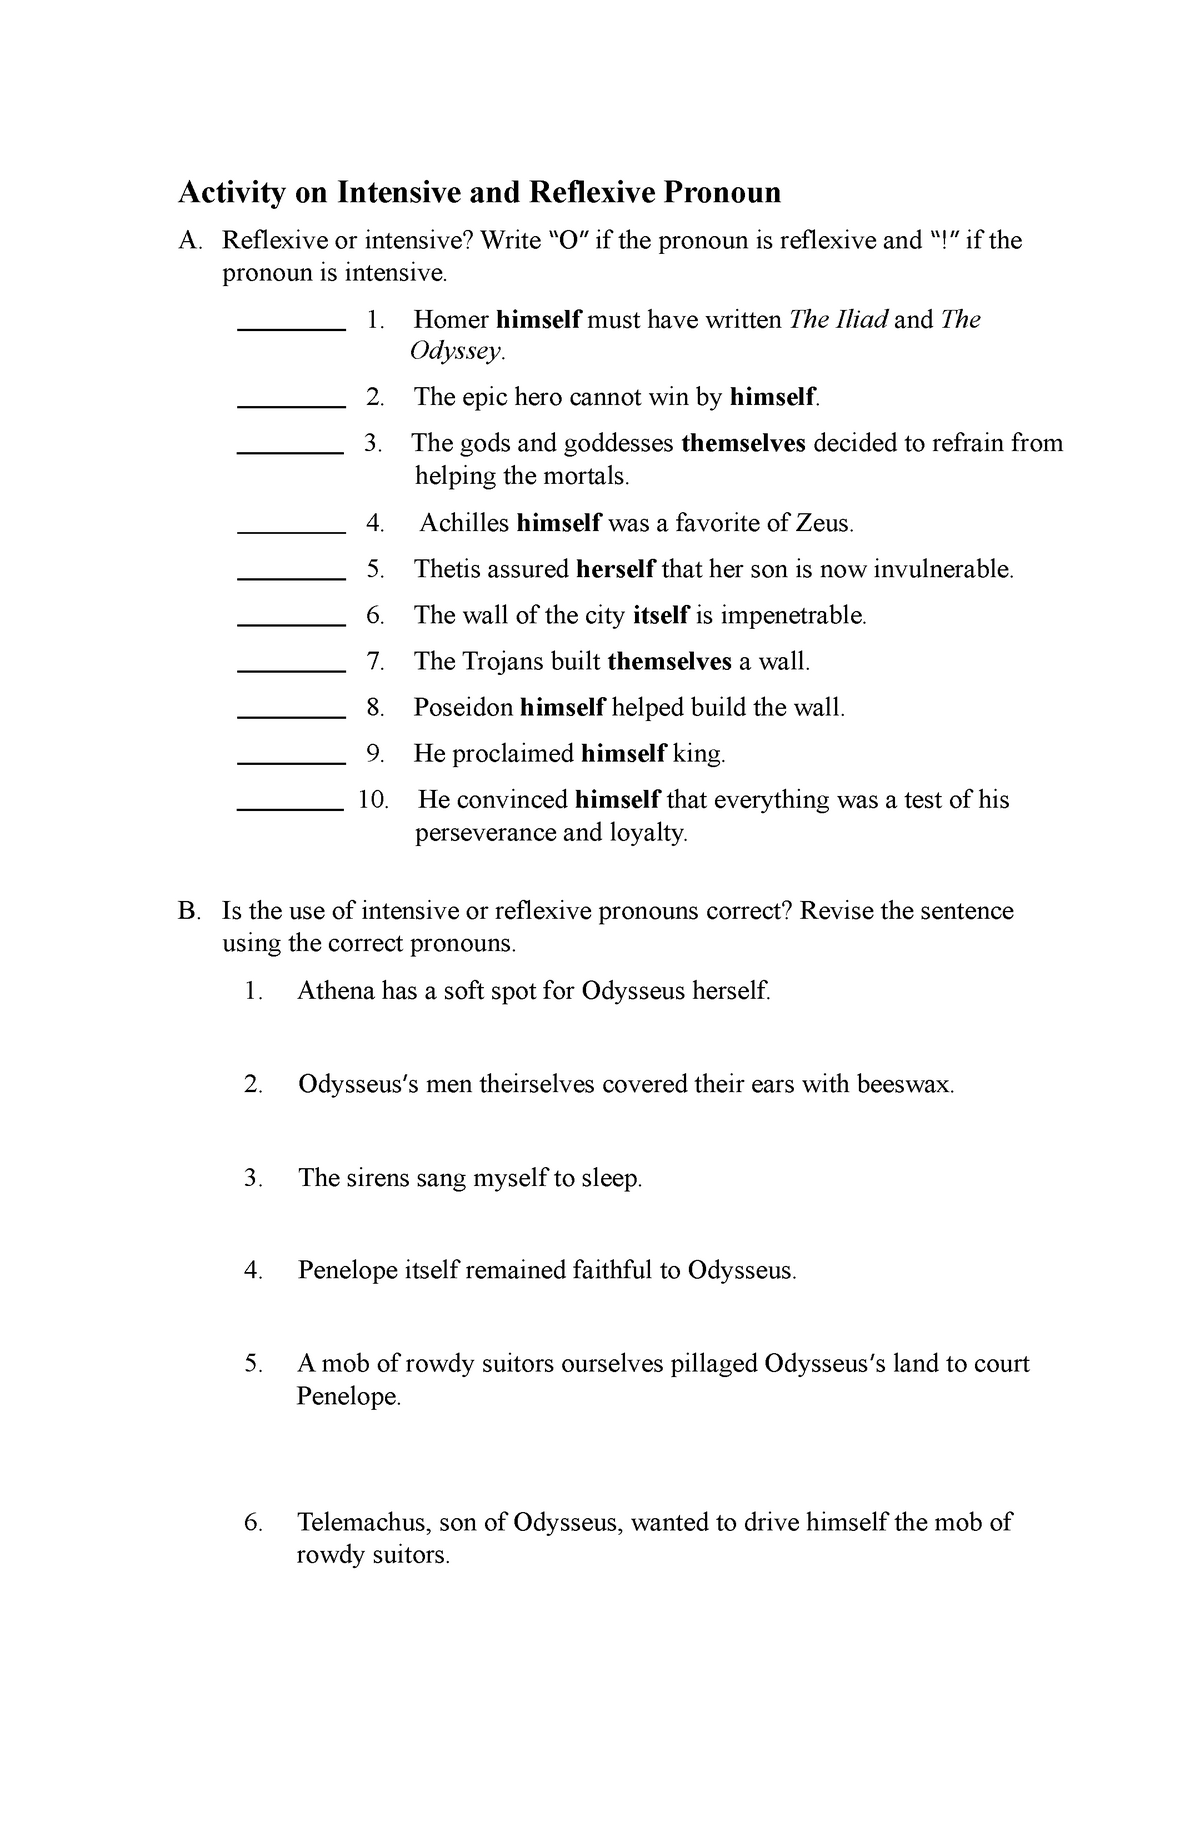 Intensive Pronouns Worksheet With Answer Key